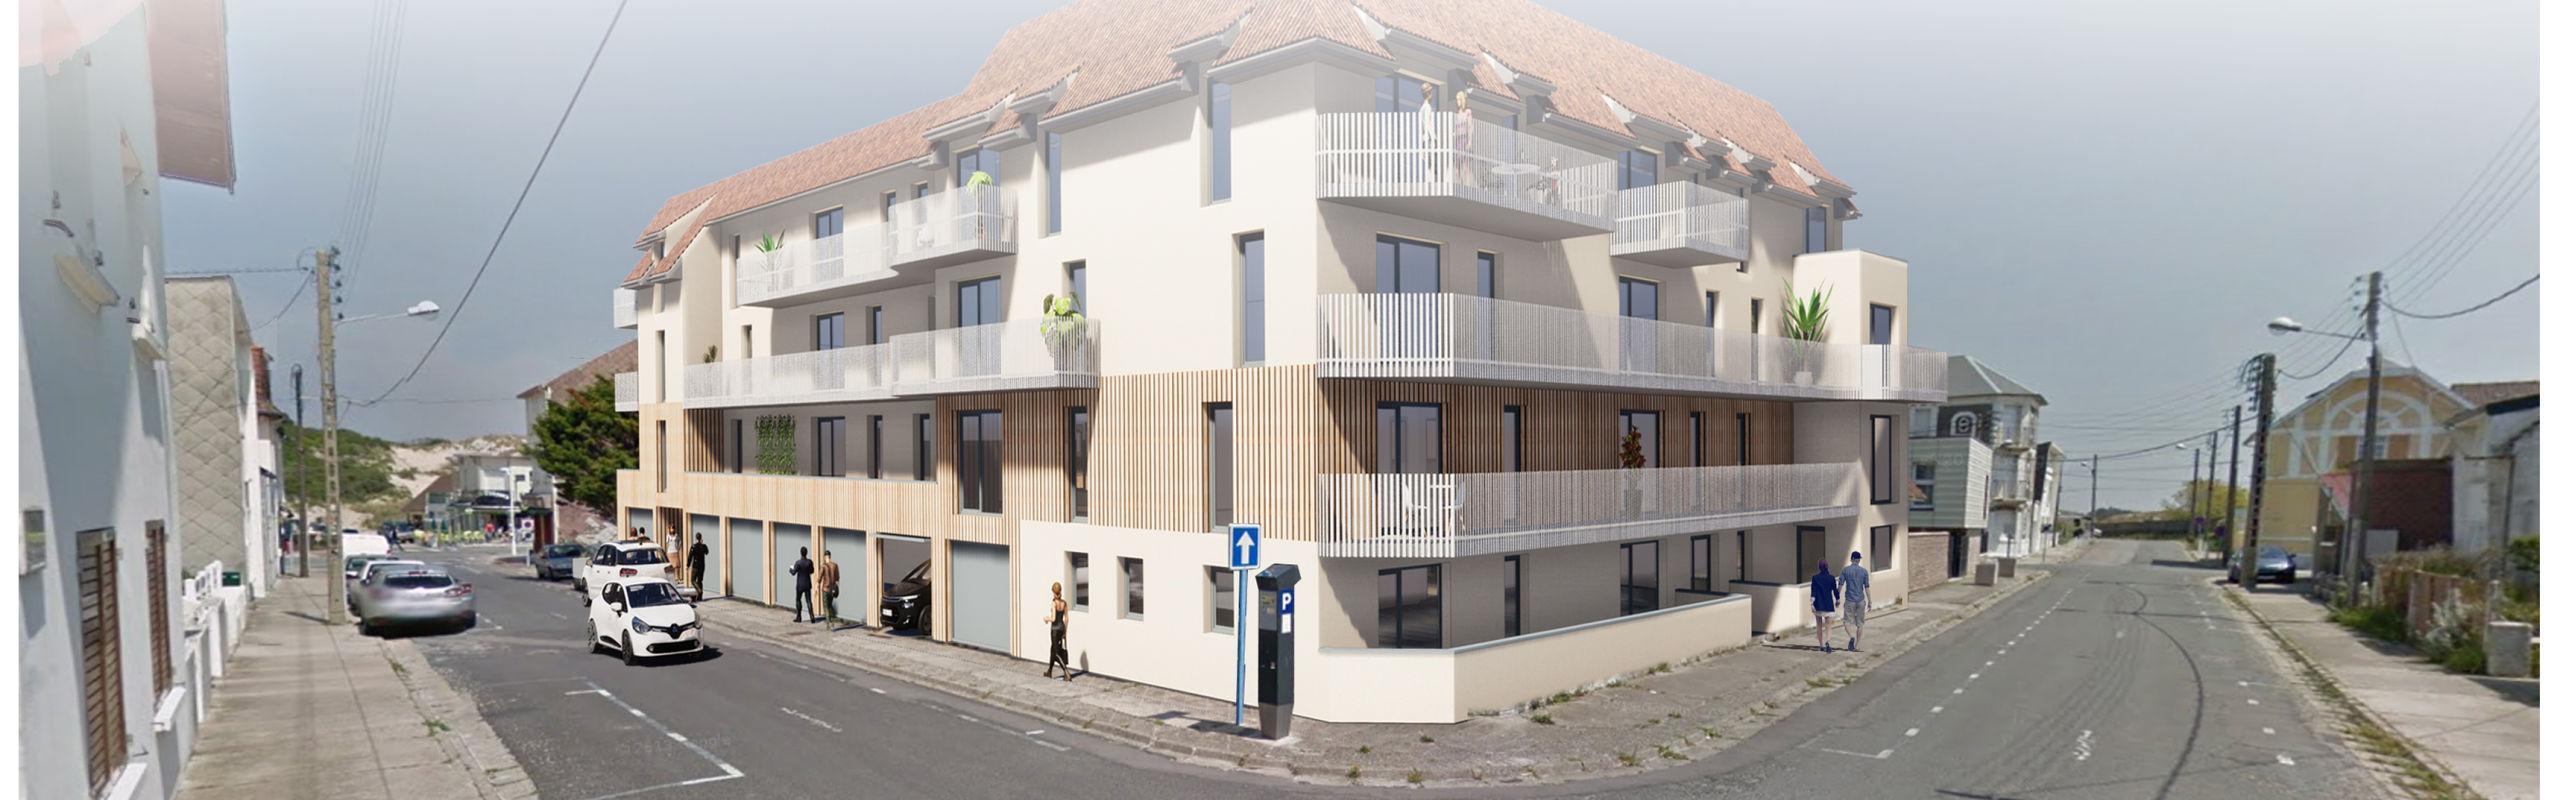 Programme immobilier neuf 80120 Fort-Mahon-Plage FM-PLG-1297